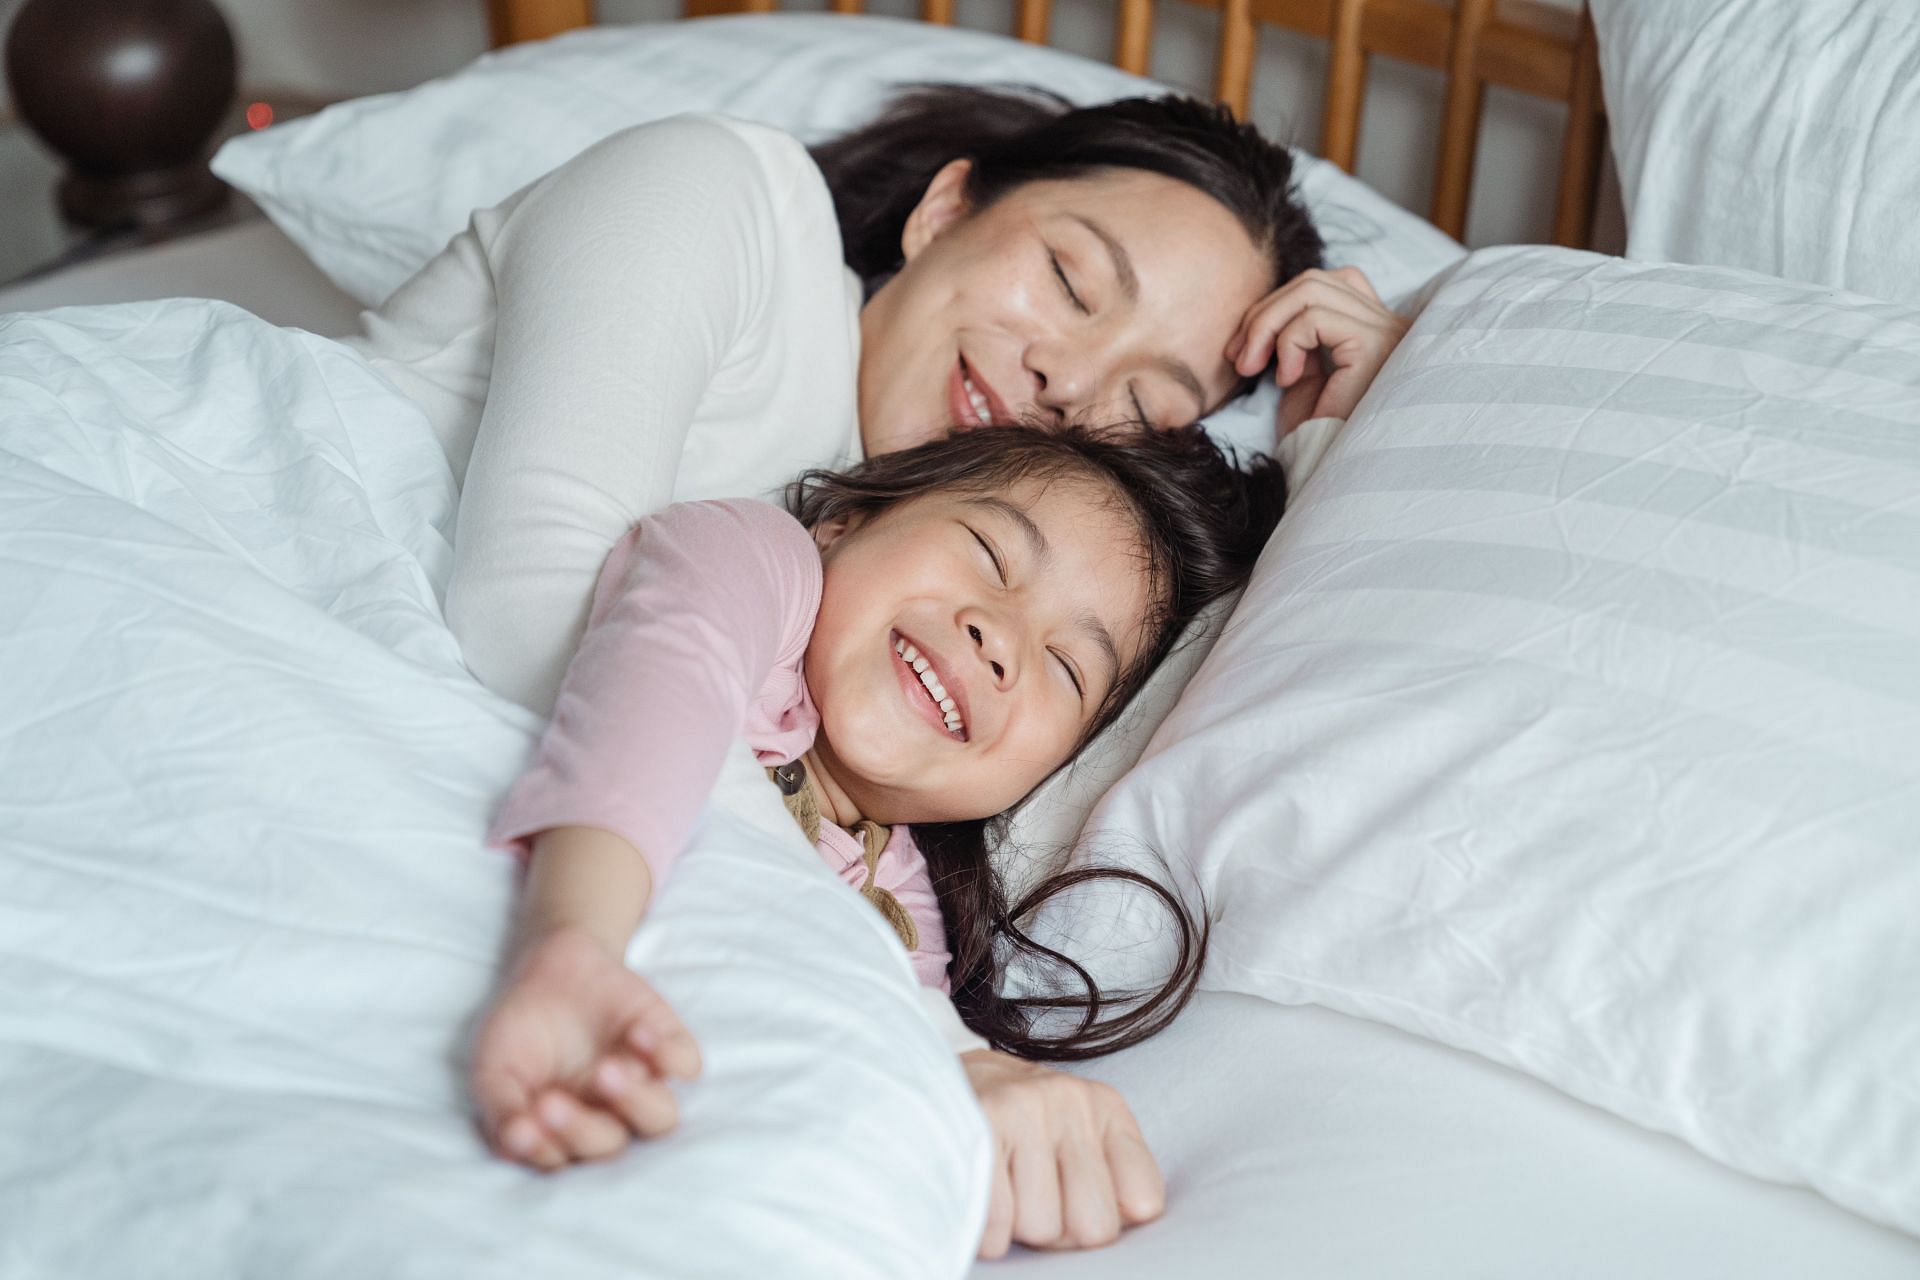 Waking up early makes time for your loved ones. (Image via Pexels/Ketut Subiyanto)